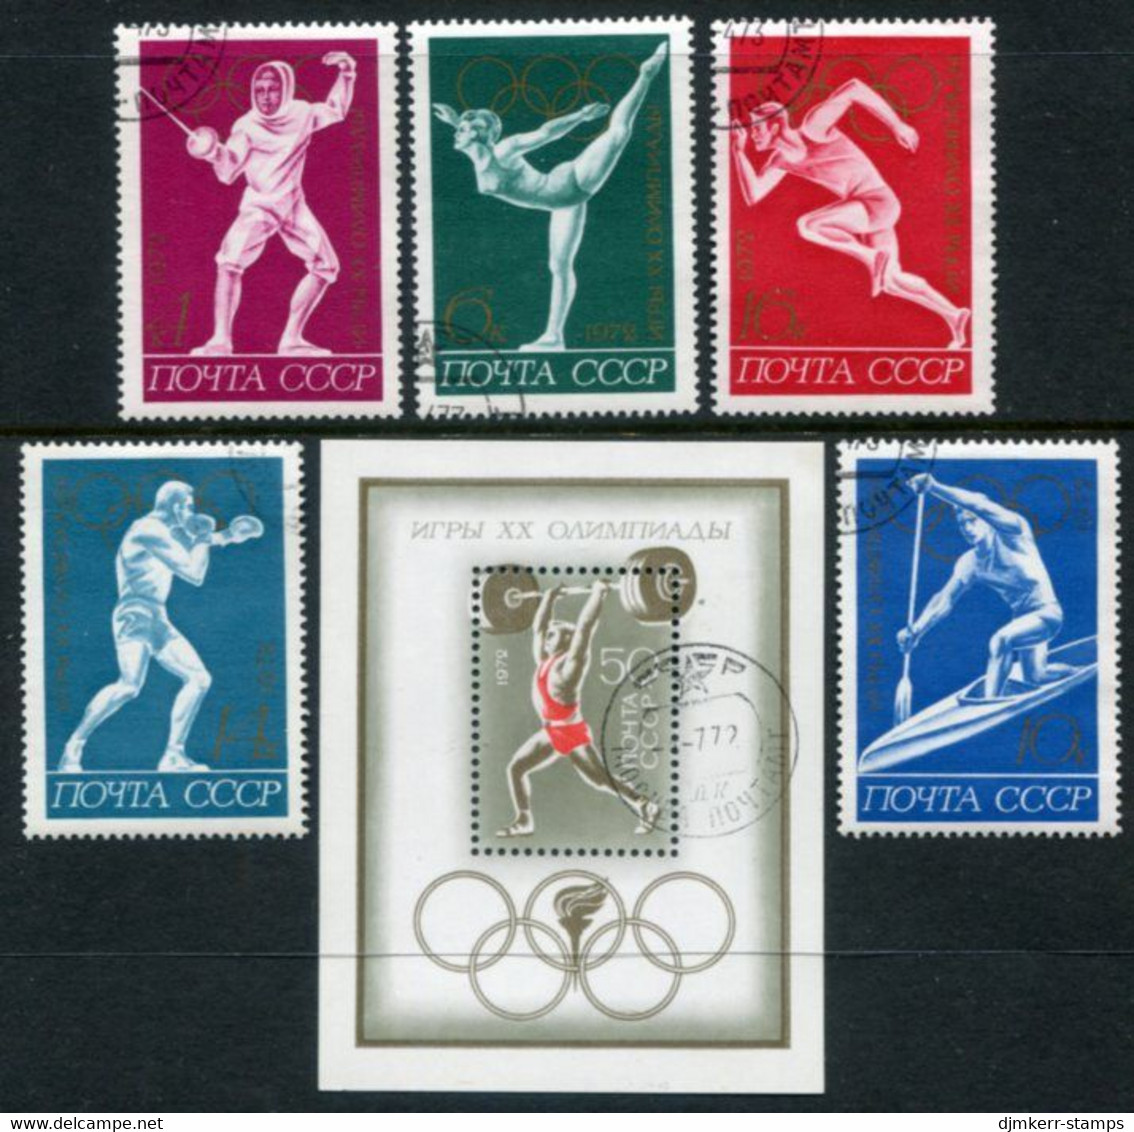 SOVIET UNION 1972 Olympic Games, Munich Used.  Michel 4020-24 + Block 77 - Used Stamps